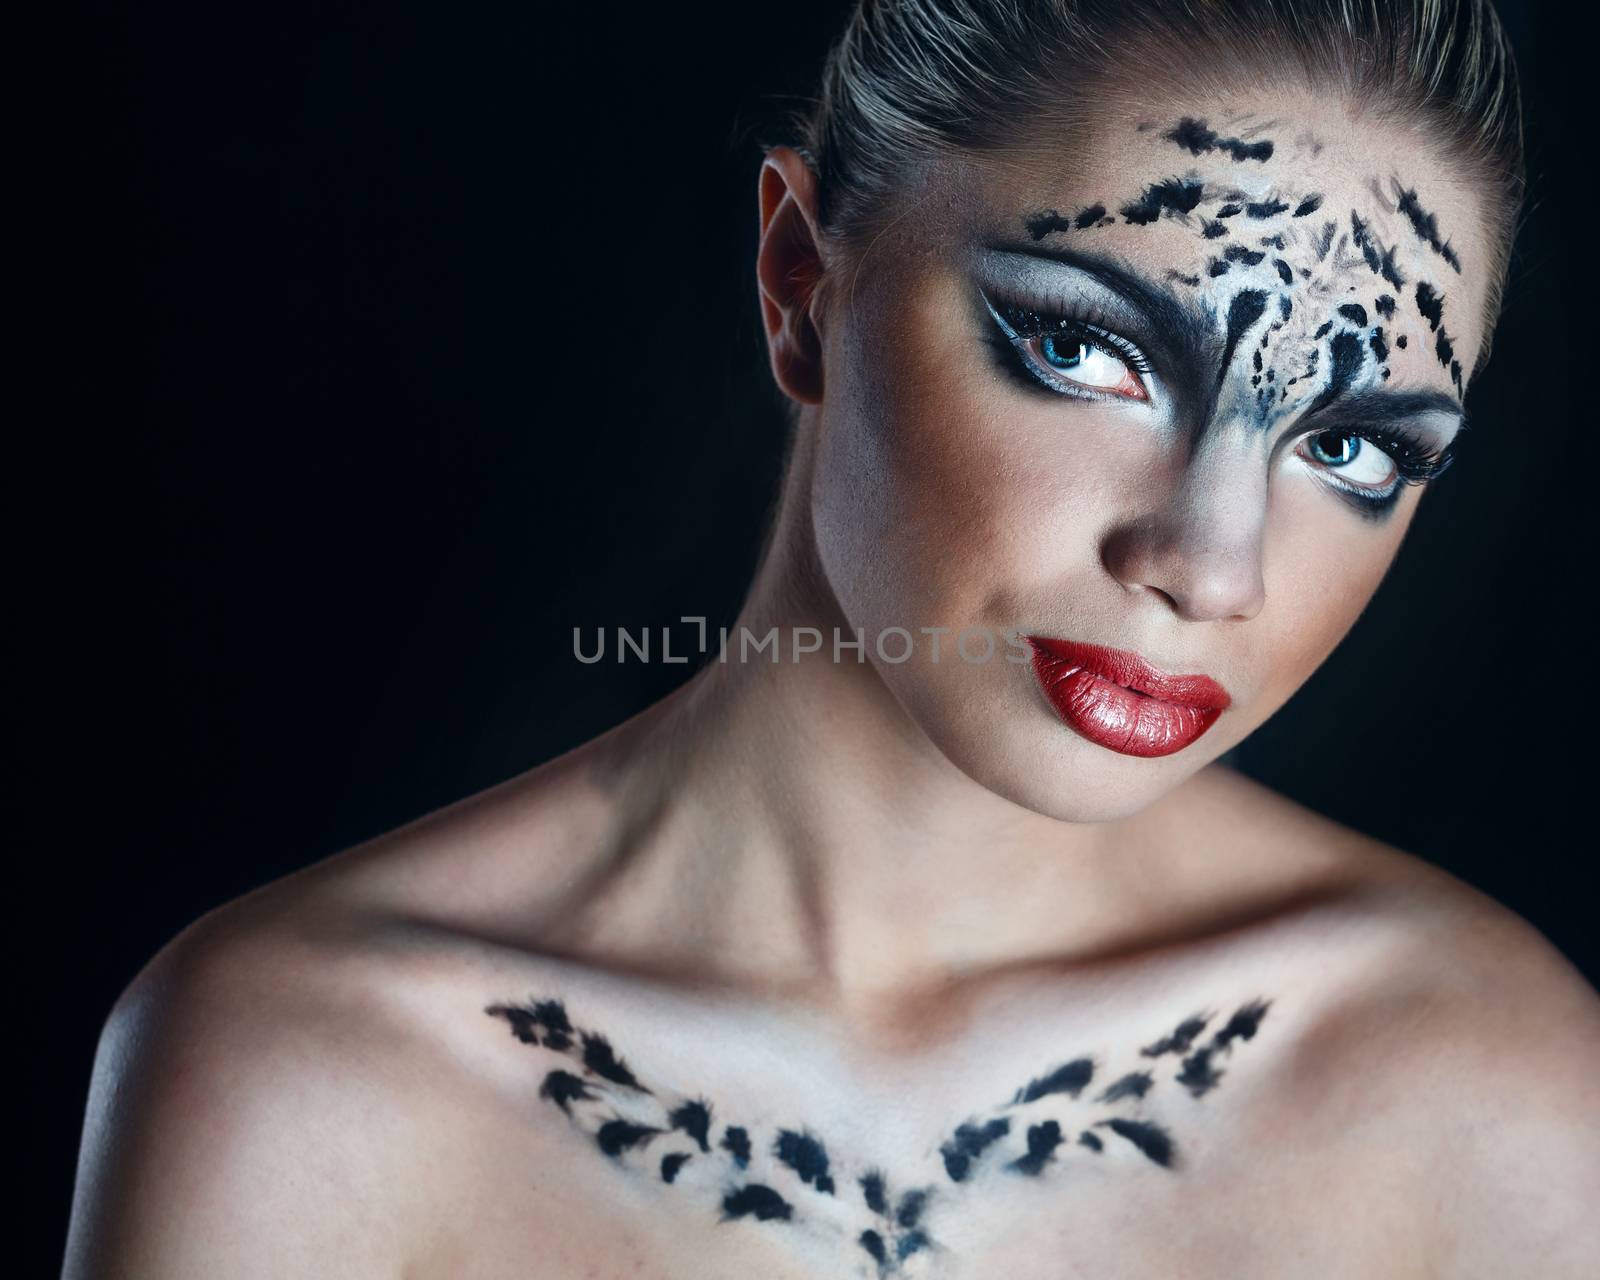 Attractive young girl with make-up snow leopard close-up portrait